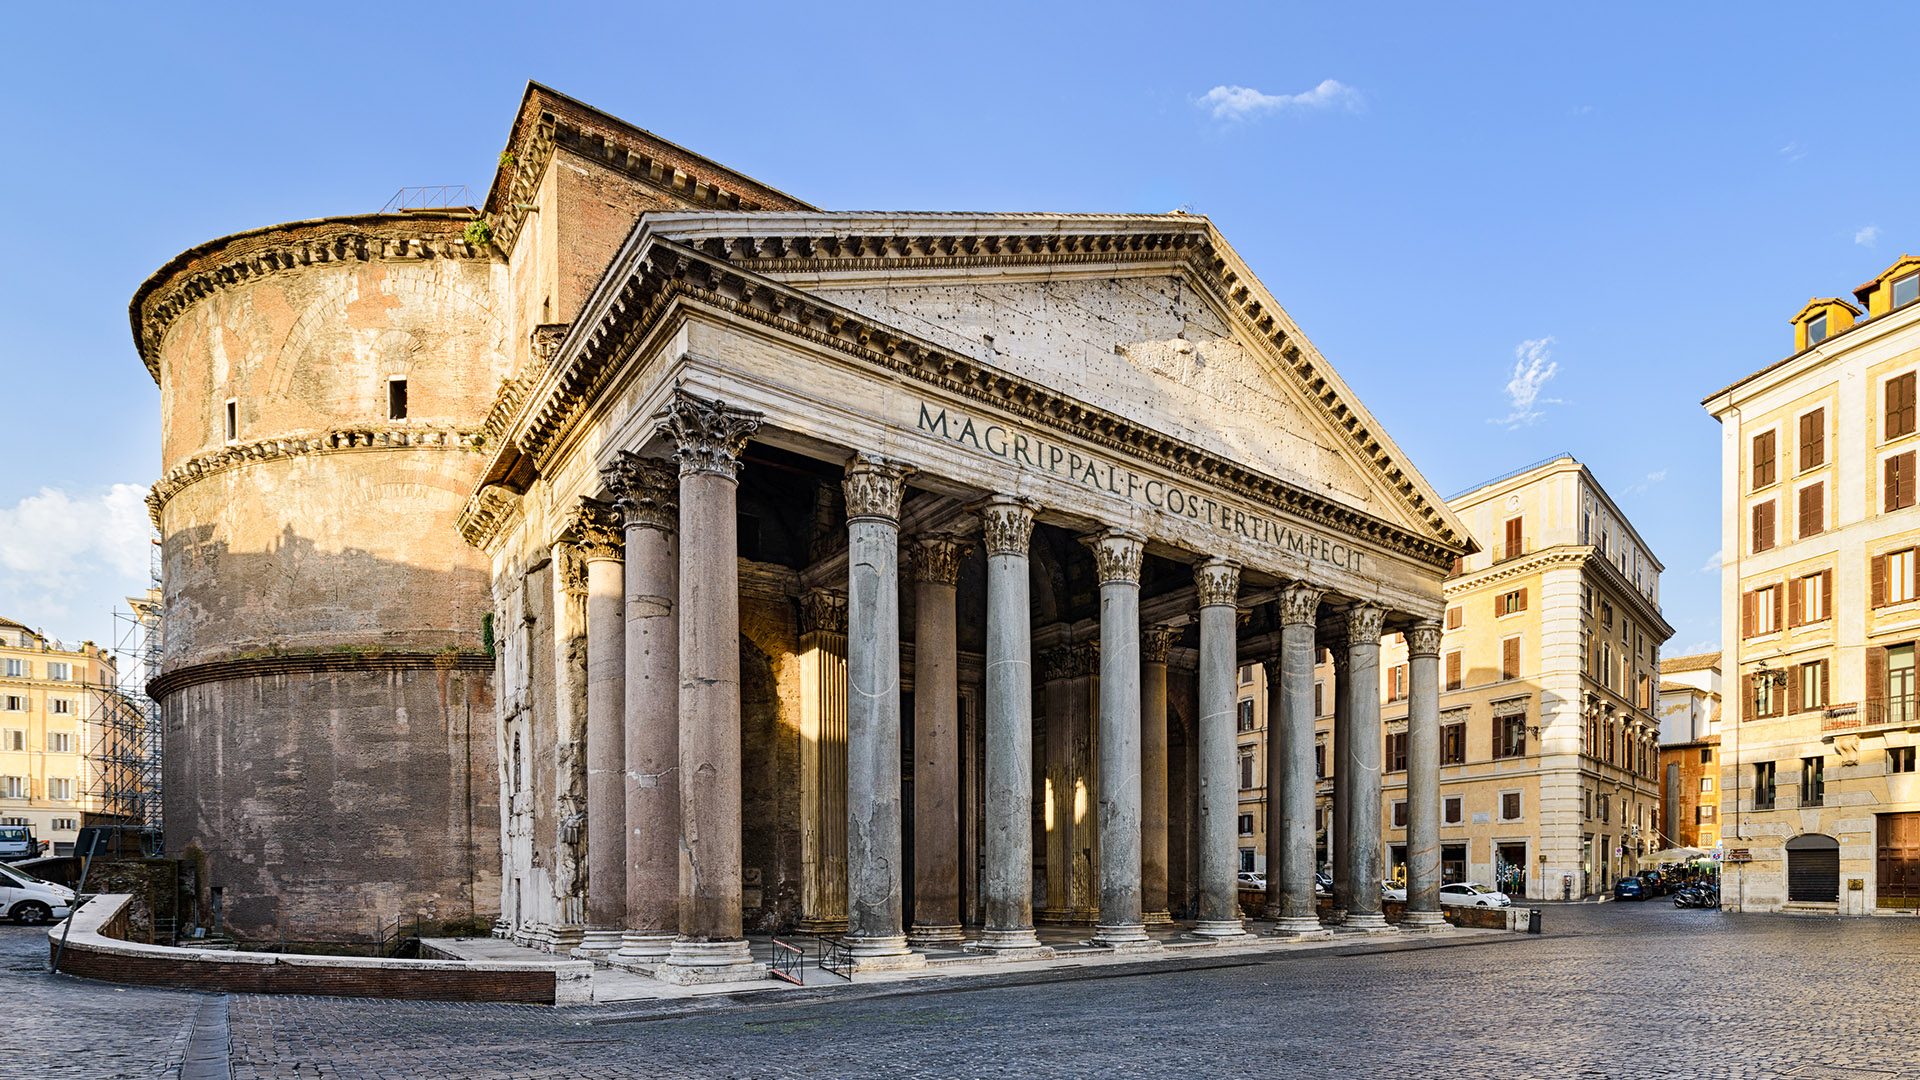 Pantheon, Rome, Italy | The Splash Lab Voice of an Architect series